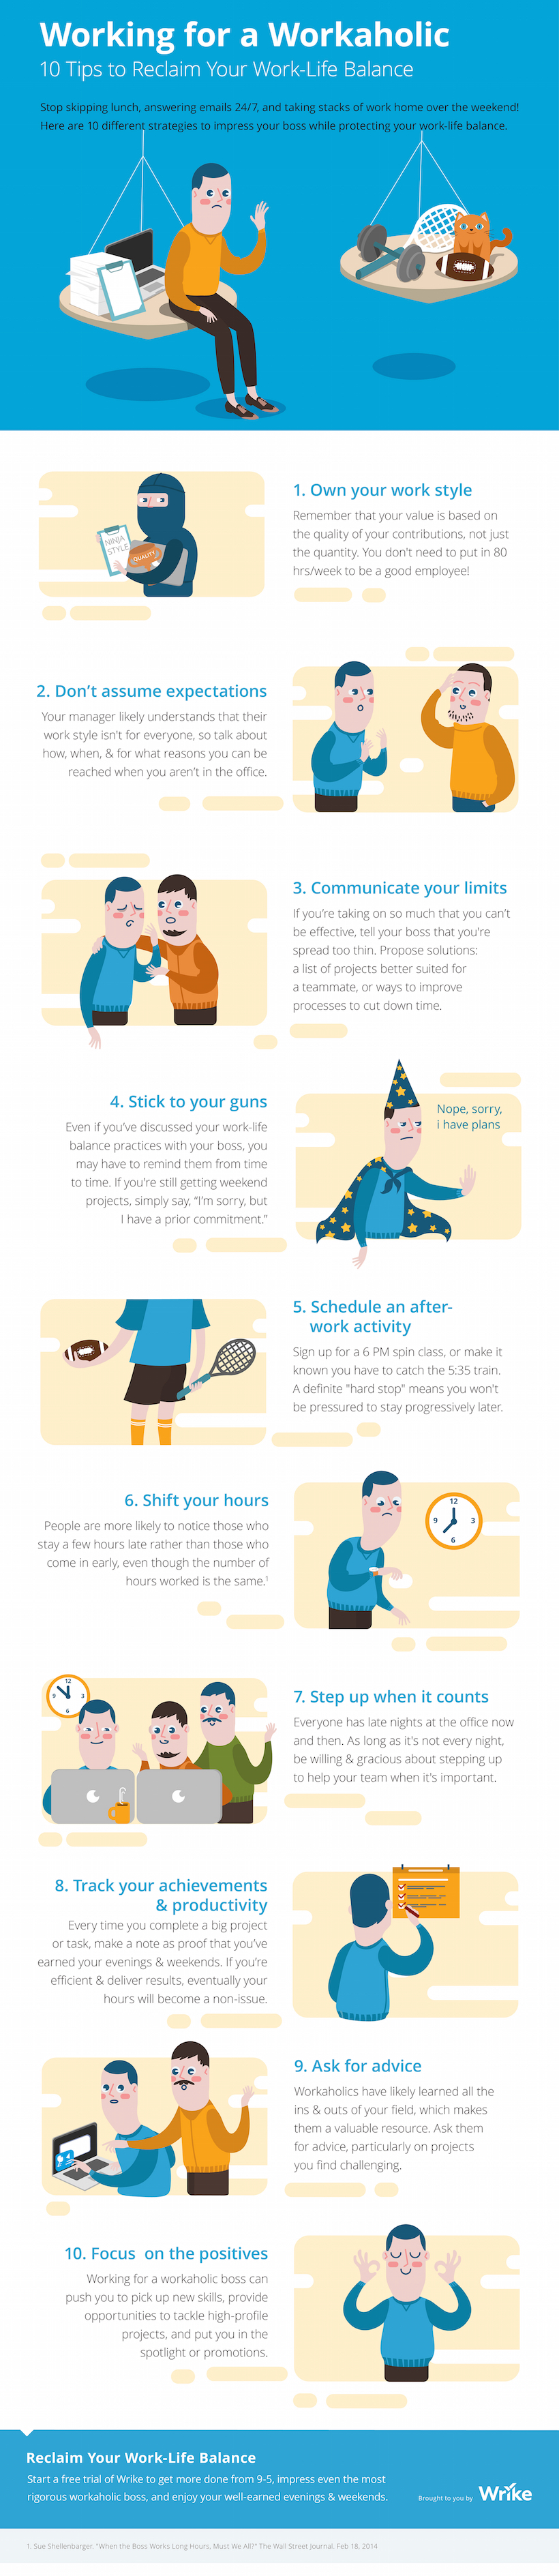 Working for a Workaholic: 10 Tips to Reclaim Your Work-Life Balance (#Infographic)